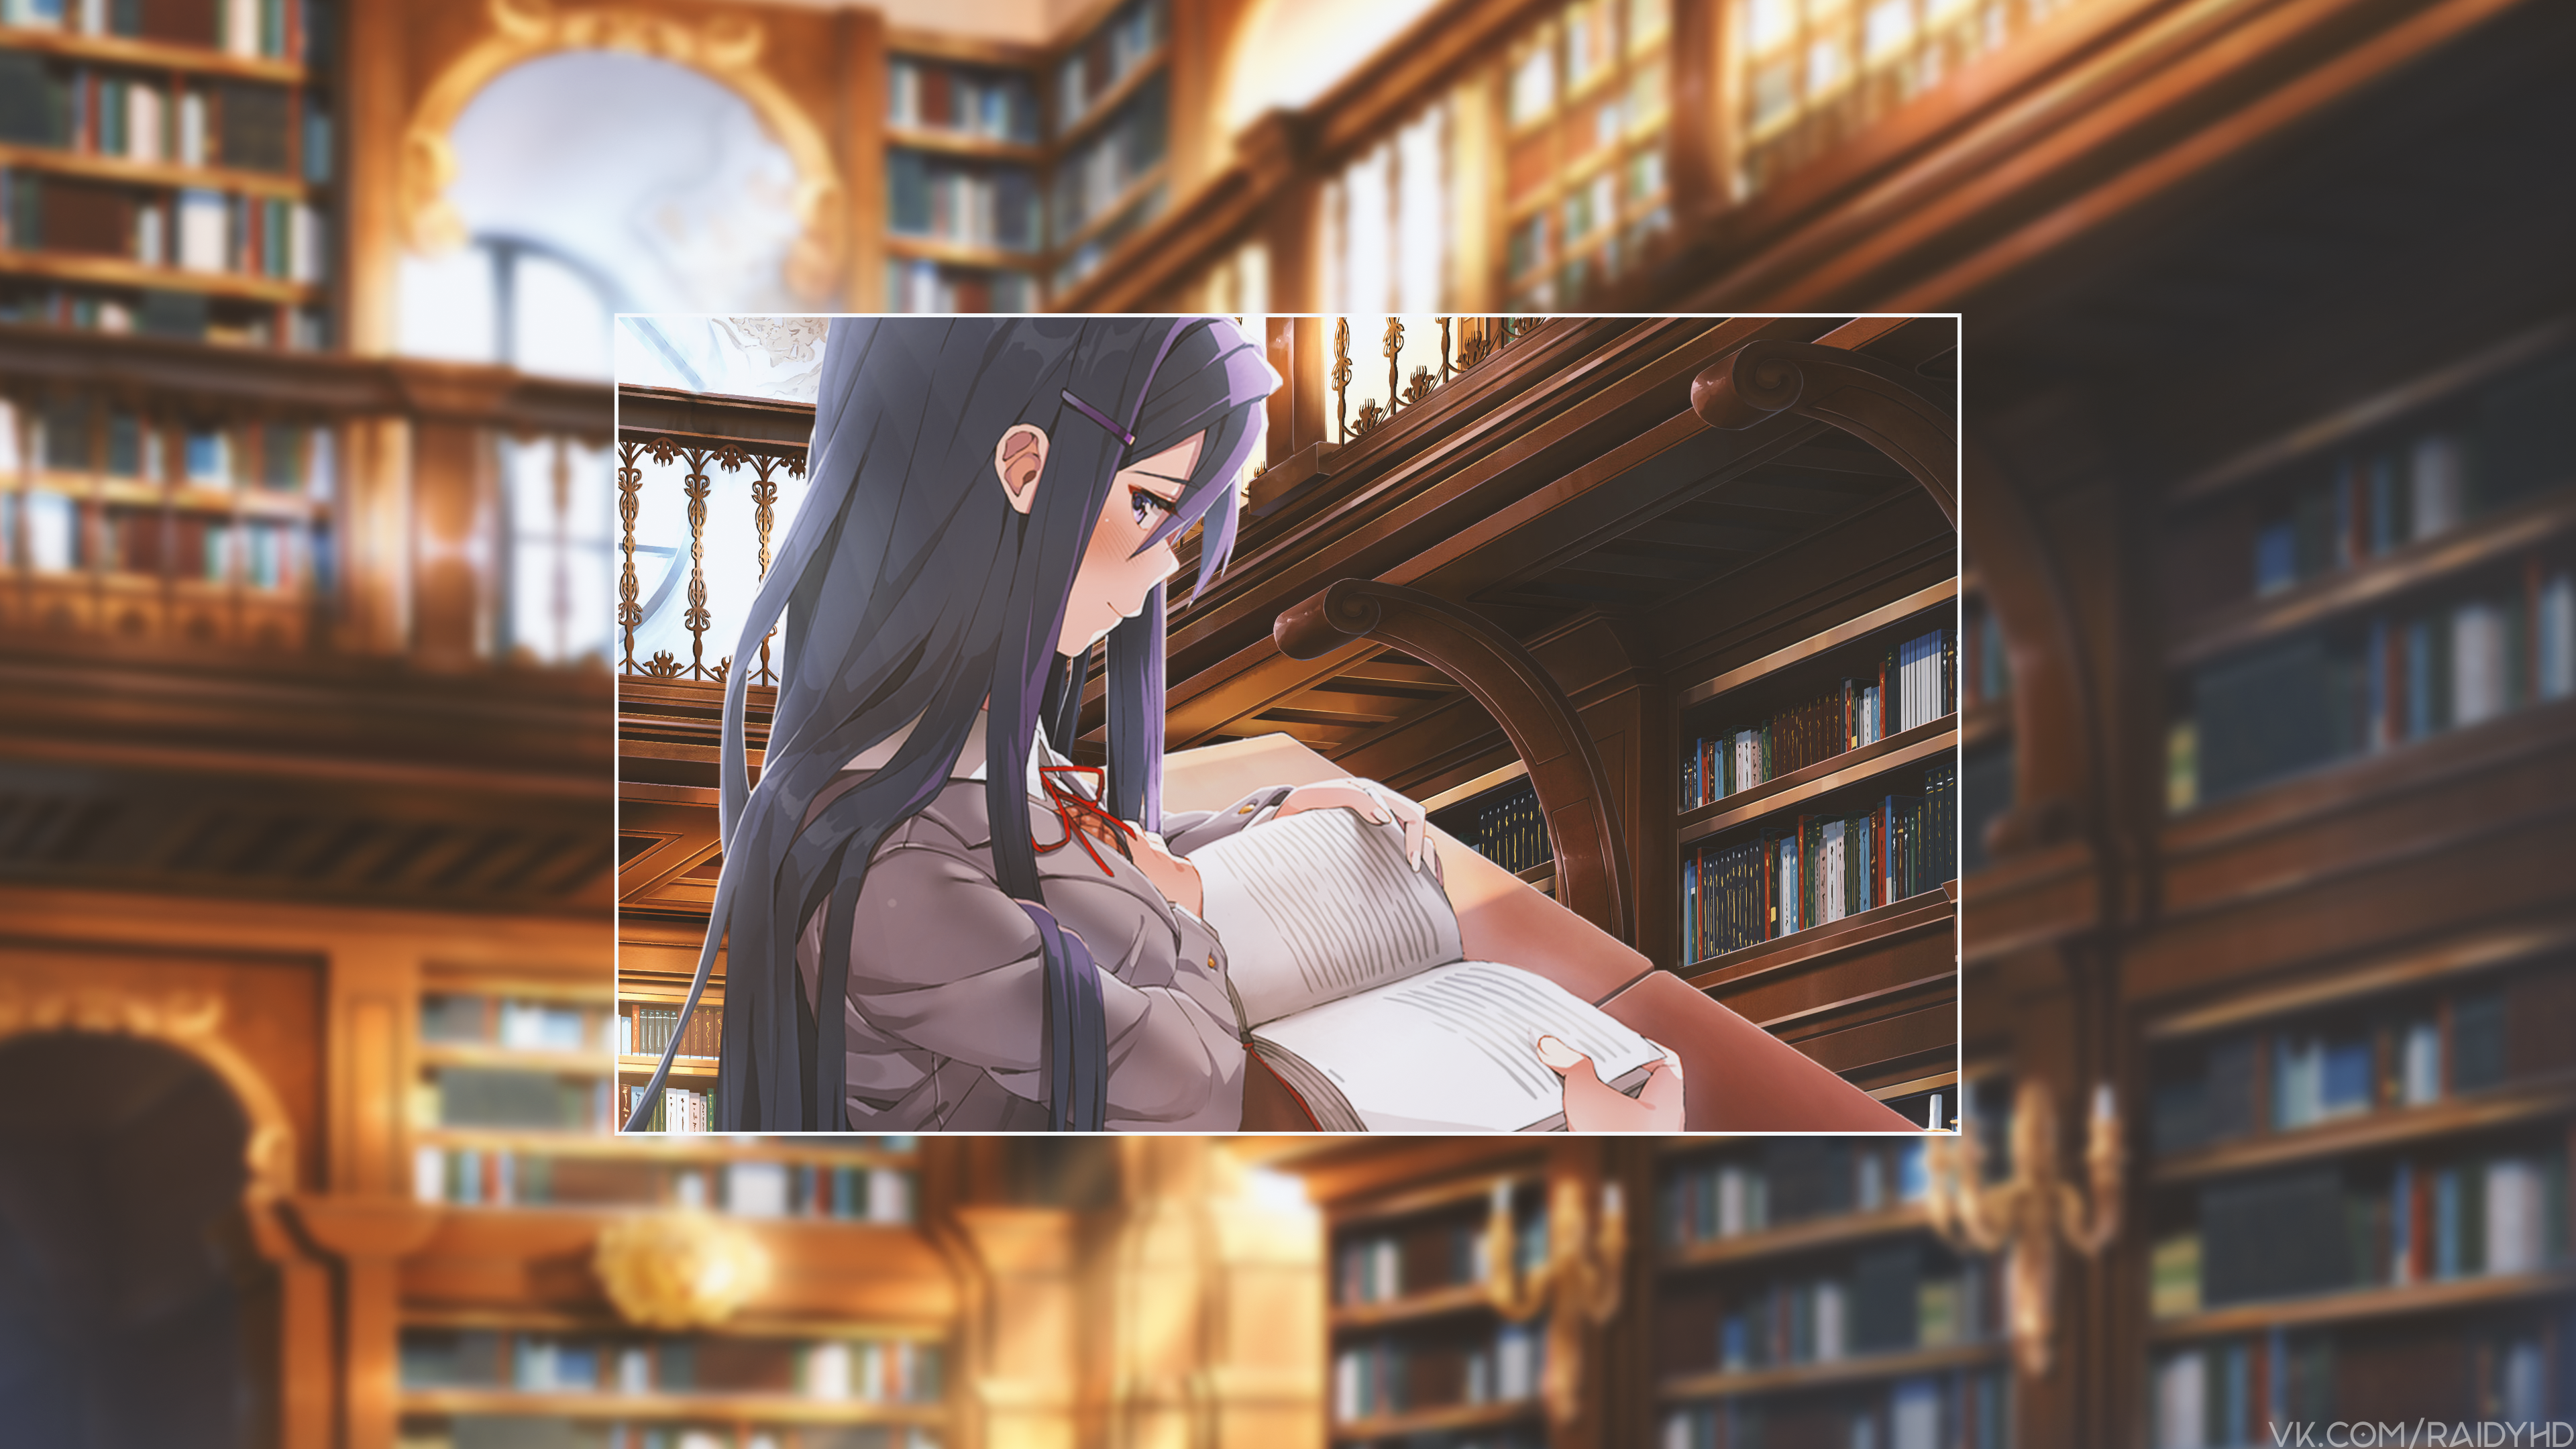 Anime 3840x2160 anime girls anime picture-in-picture Yuri (Doki Doki Literature Club) Doki Doki Literature Club library